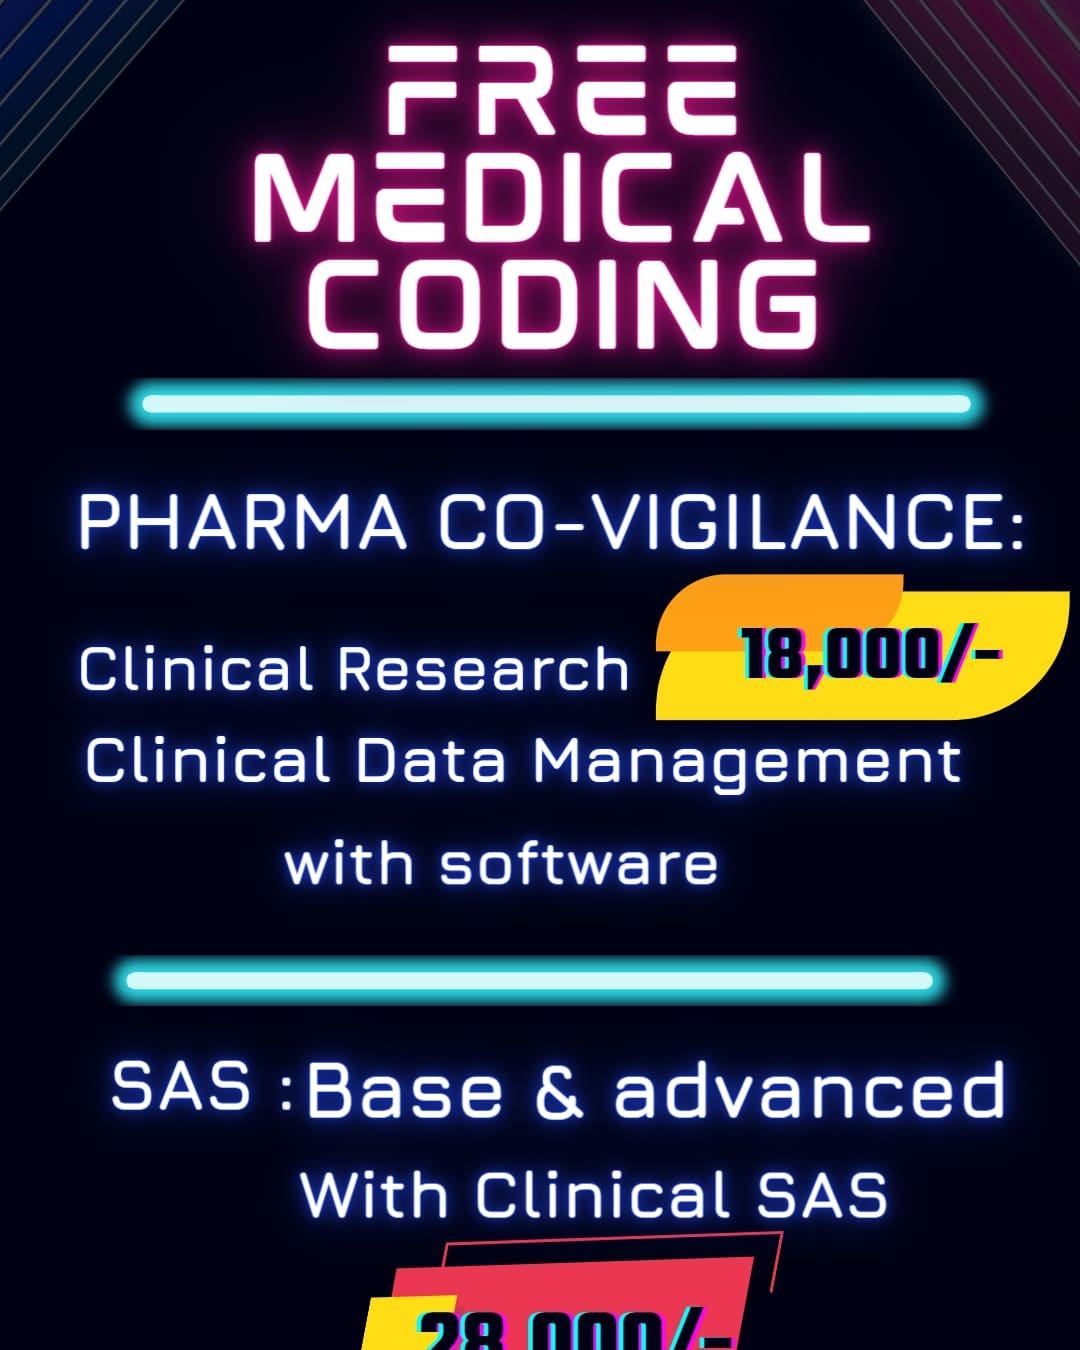 Medical coding, pharmacovigilance and clinical SAS training with placements 